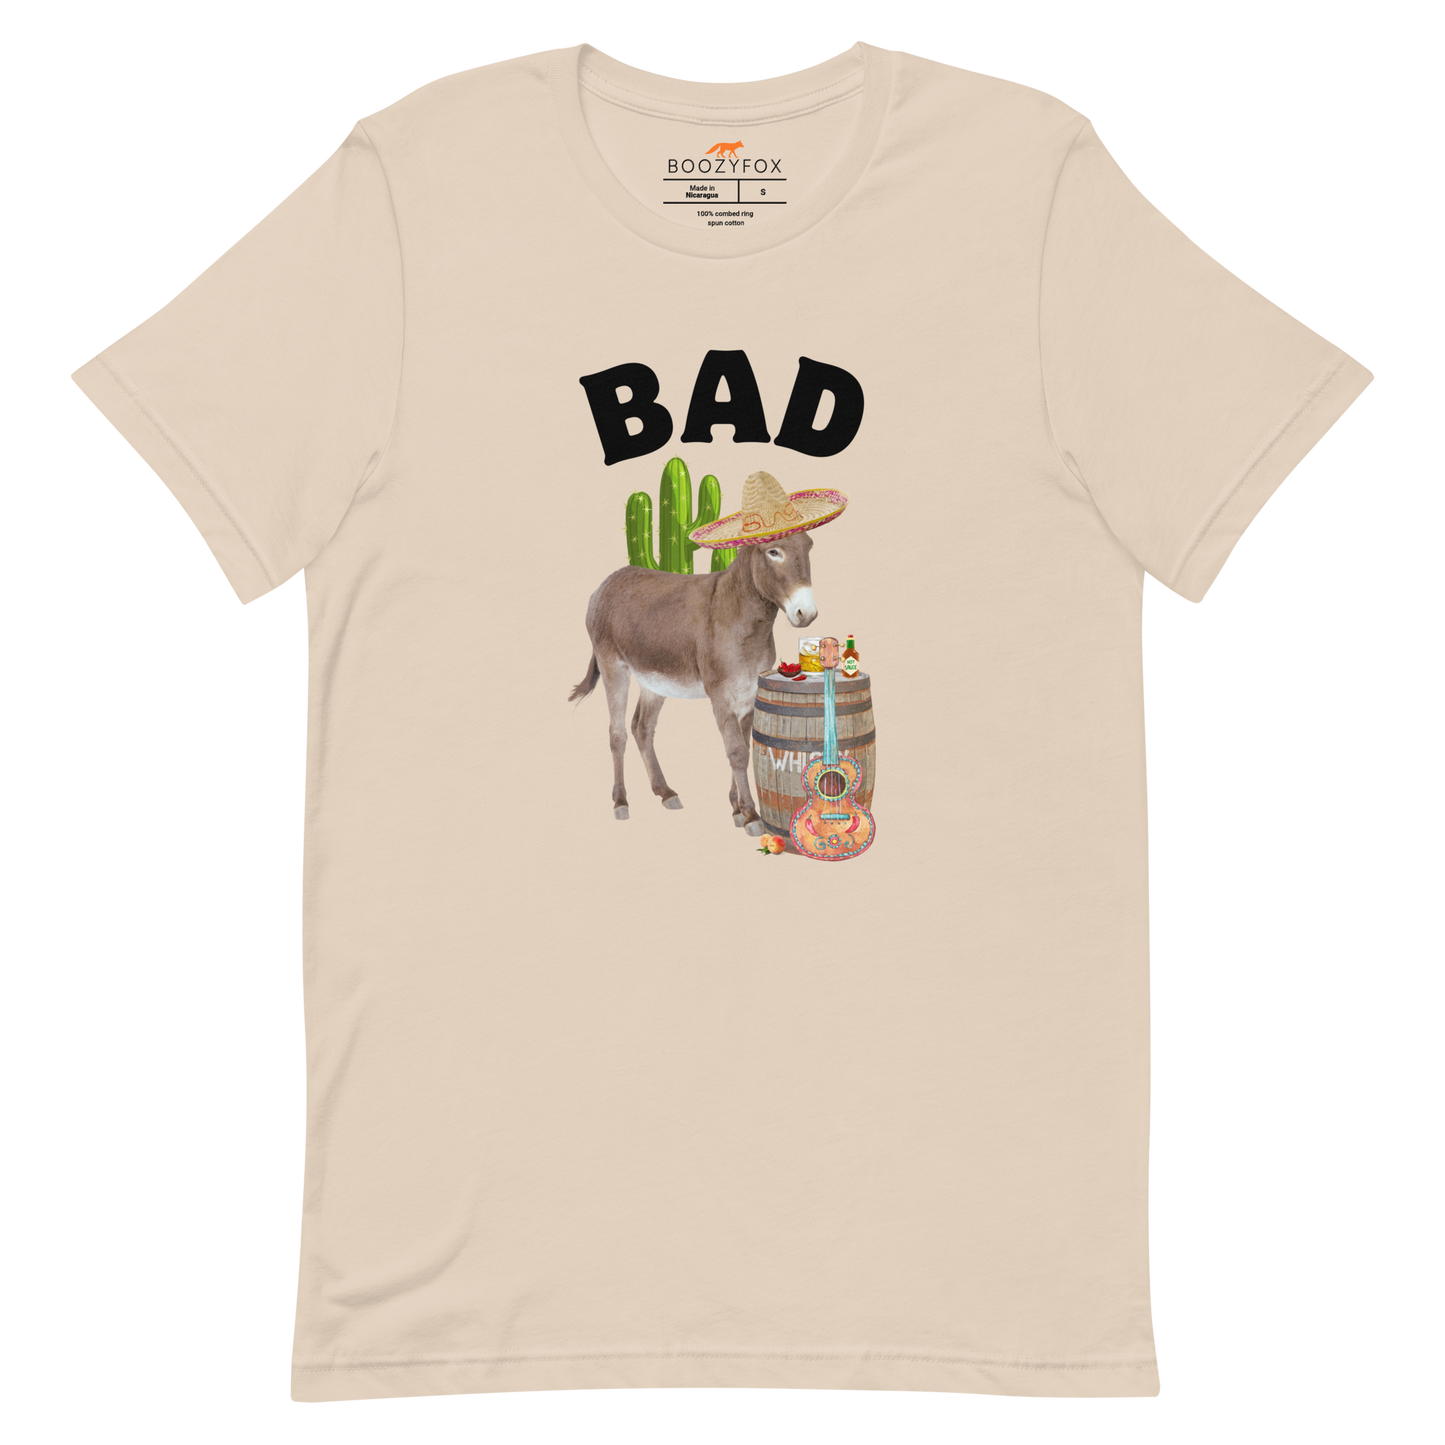 Soft Cream Premium Donkey Tee featuring a Funny Bad Ass Donkey graphic on the chest - Funny Graphic Bad Ass Donkey Tees - Boozy Fox